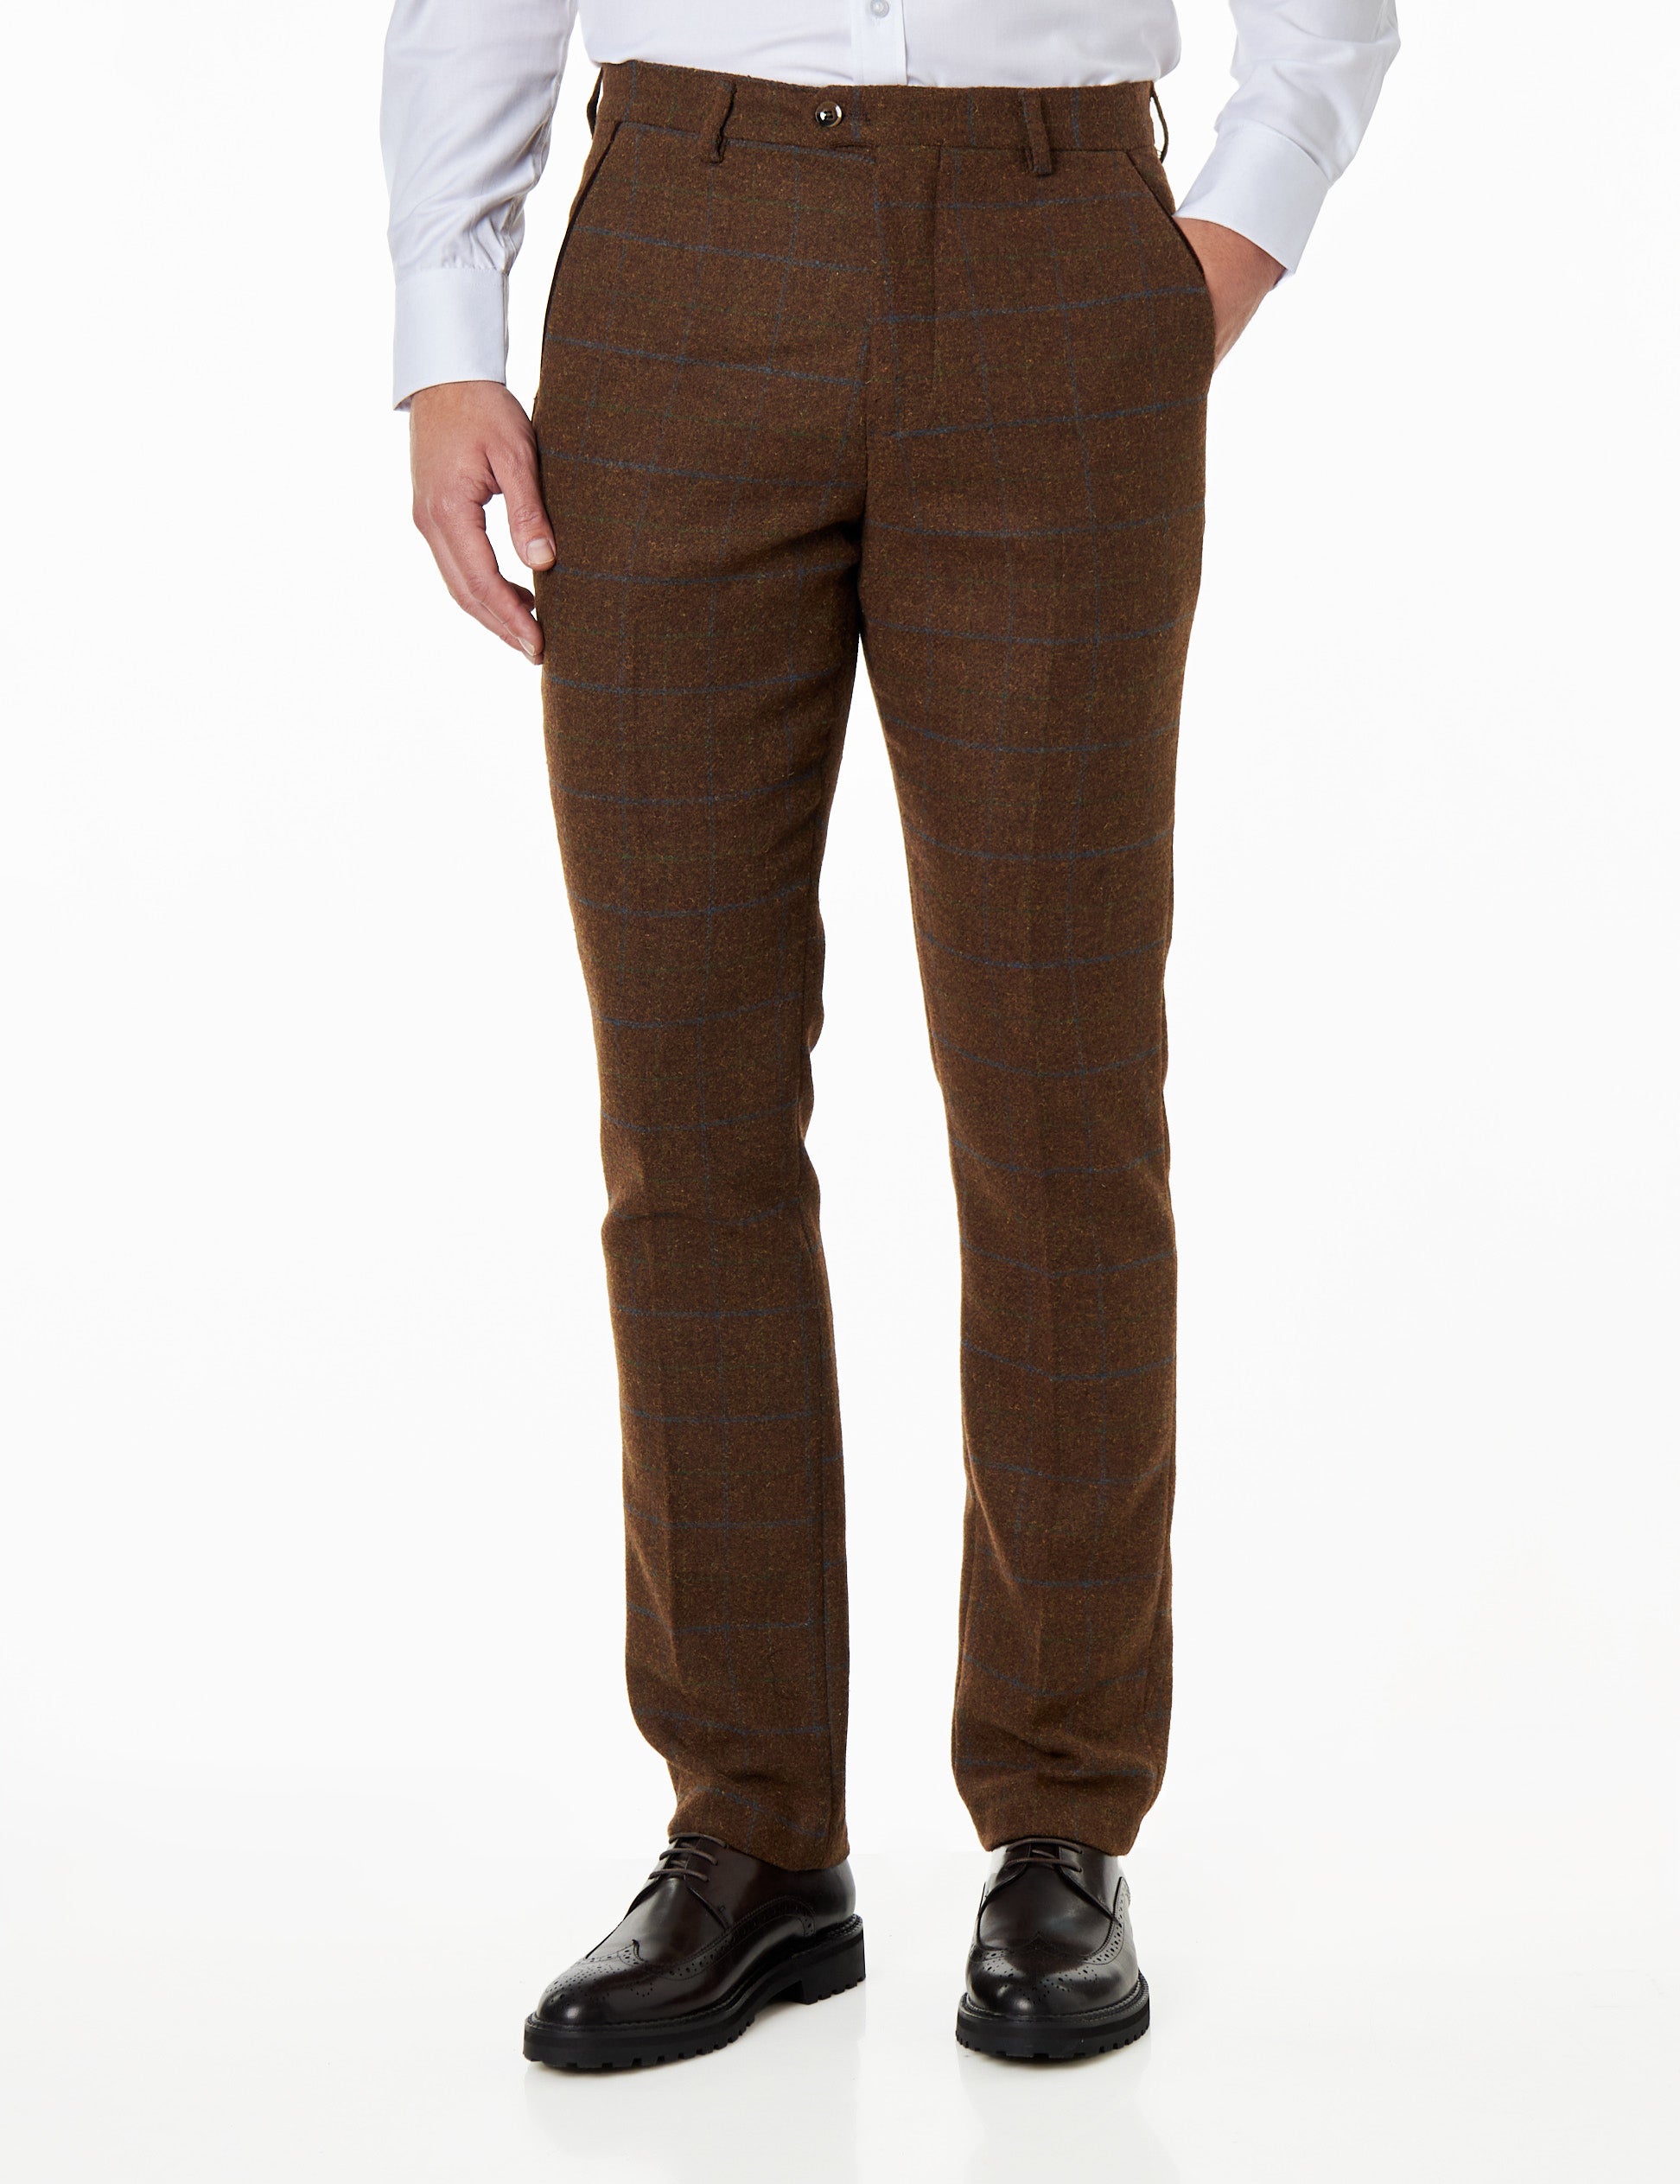 VITORI A1 - Mens Brown Vintage Styled Check Herringbone Tailored Fit Trousers